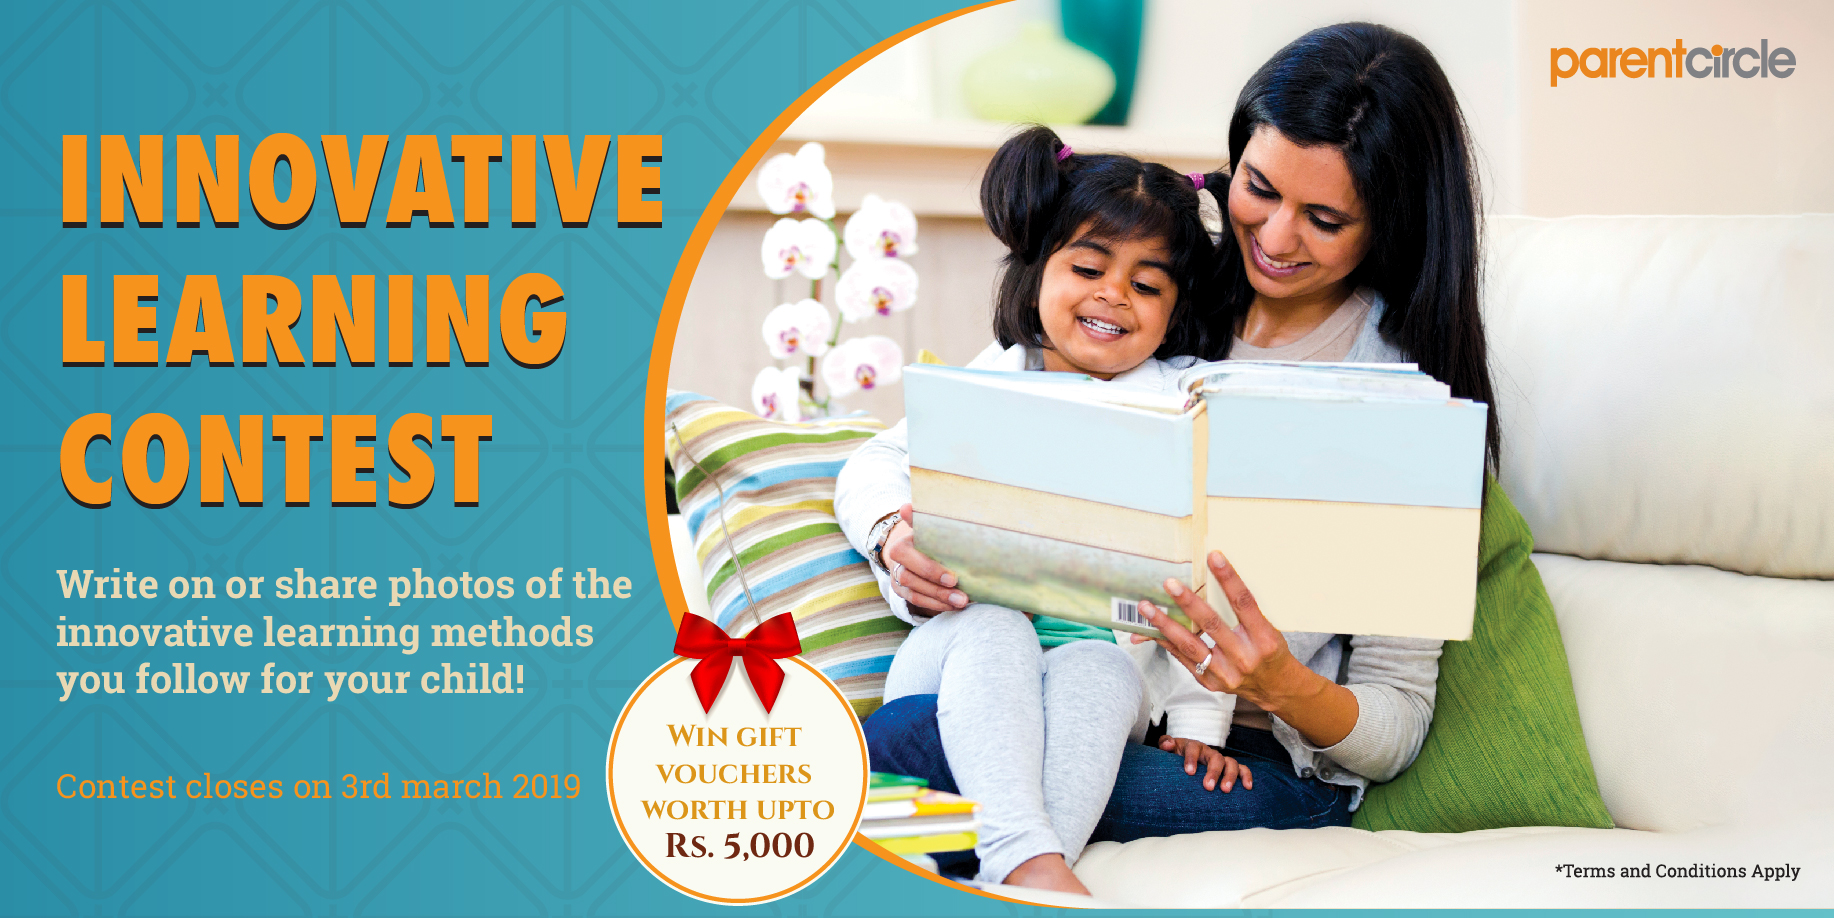 CONTEST ALERT - Innovative Learning Contest